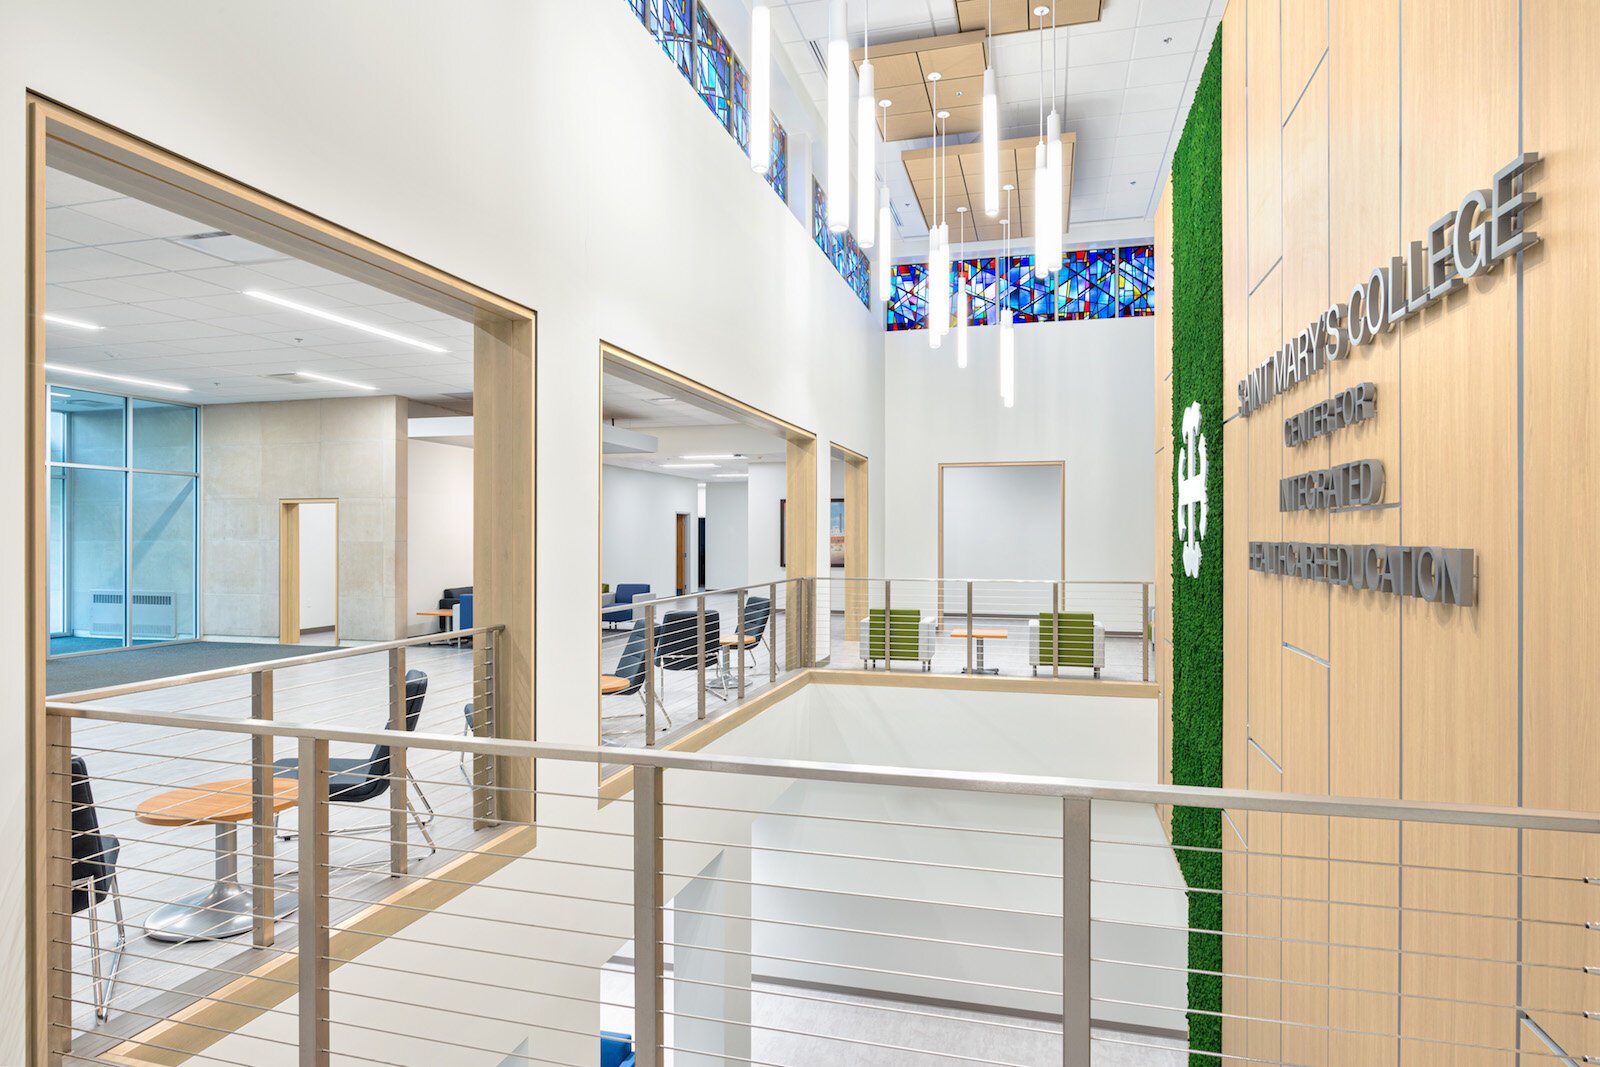 The Saint Mary’s Regina Hall Center for Integrative Healthcare Education incorporates people-focused design ideas, such as natural light, biophilic design, and acoustical separation.